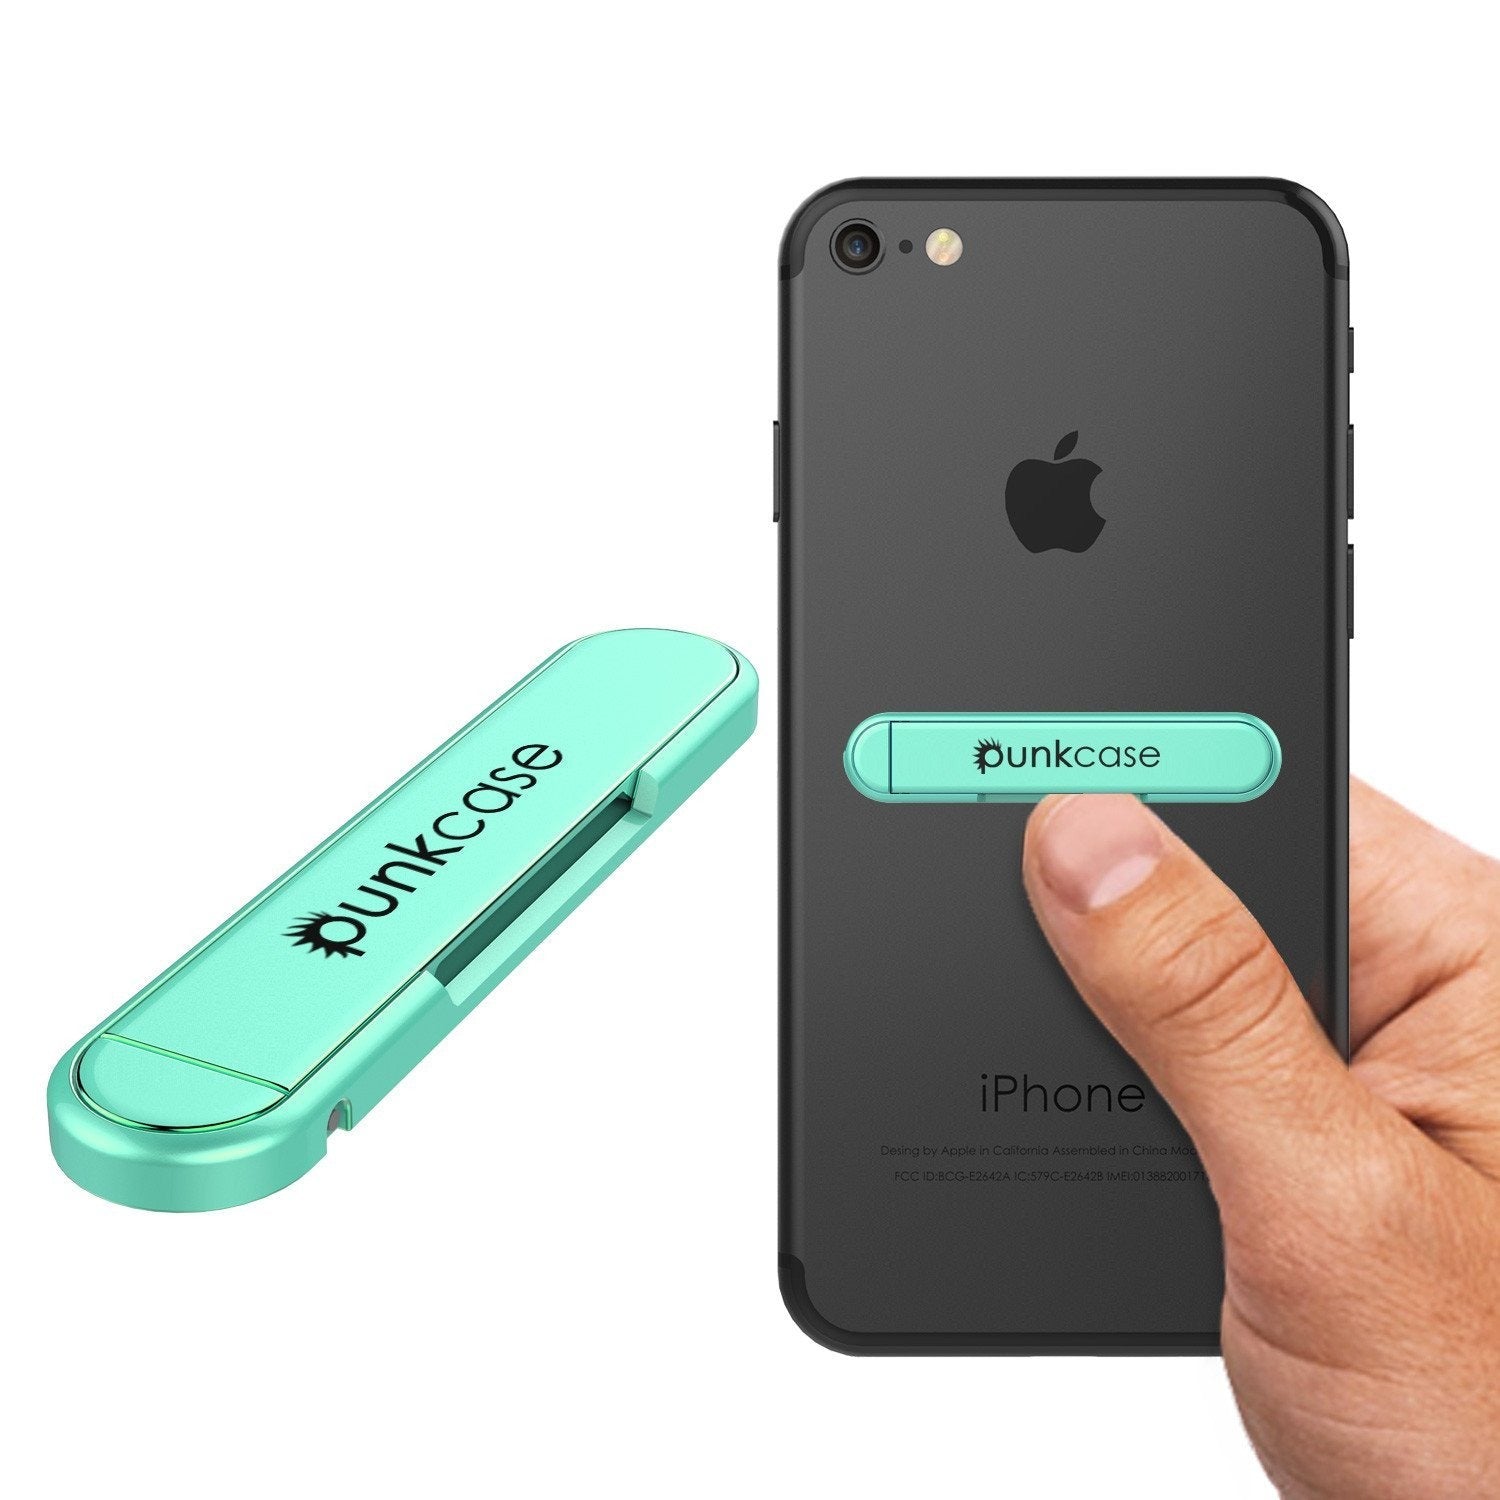 PUNKCASE FlickStick Universal Cell Phone Kickstand for all Mobile Phones & Cases with Flat Backs, One Finger Operation (Teal) - PunkCase NZ